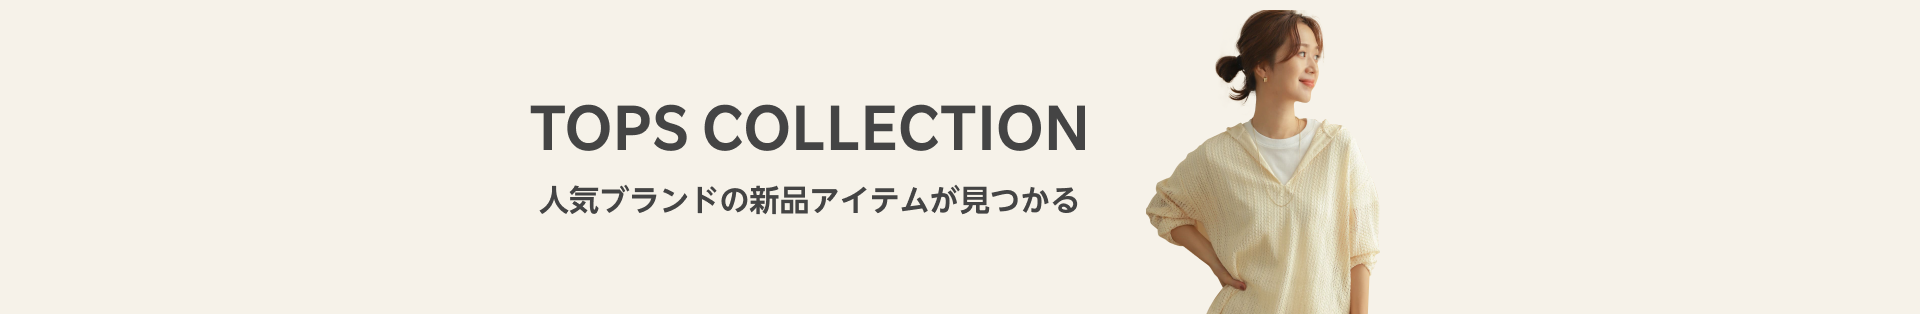 OUTLET・SALE TOPS COLLECTION 人気ブランドの新品アイテムが見つかる